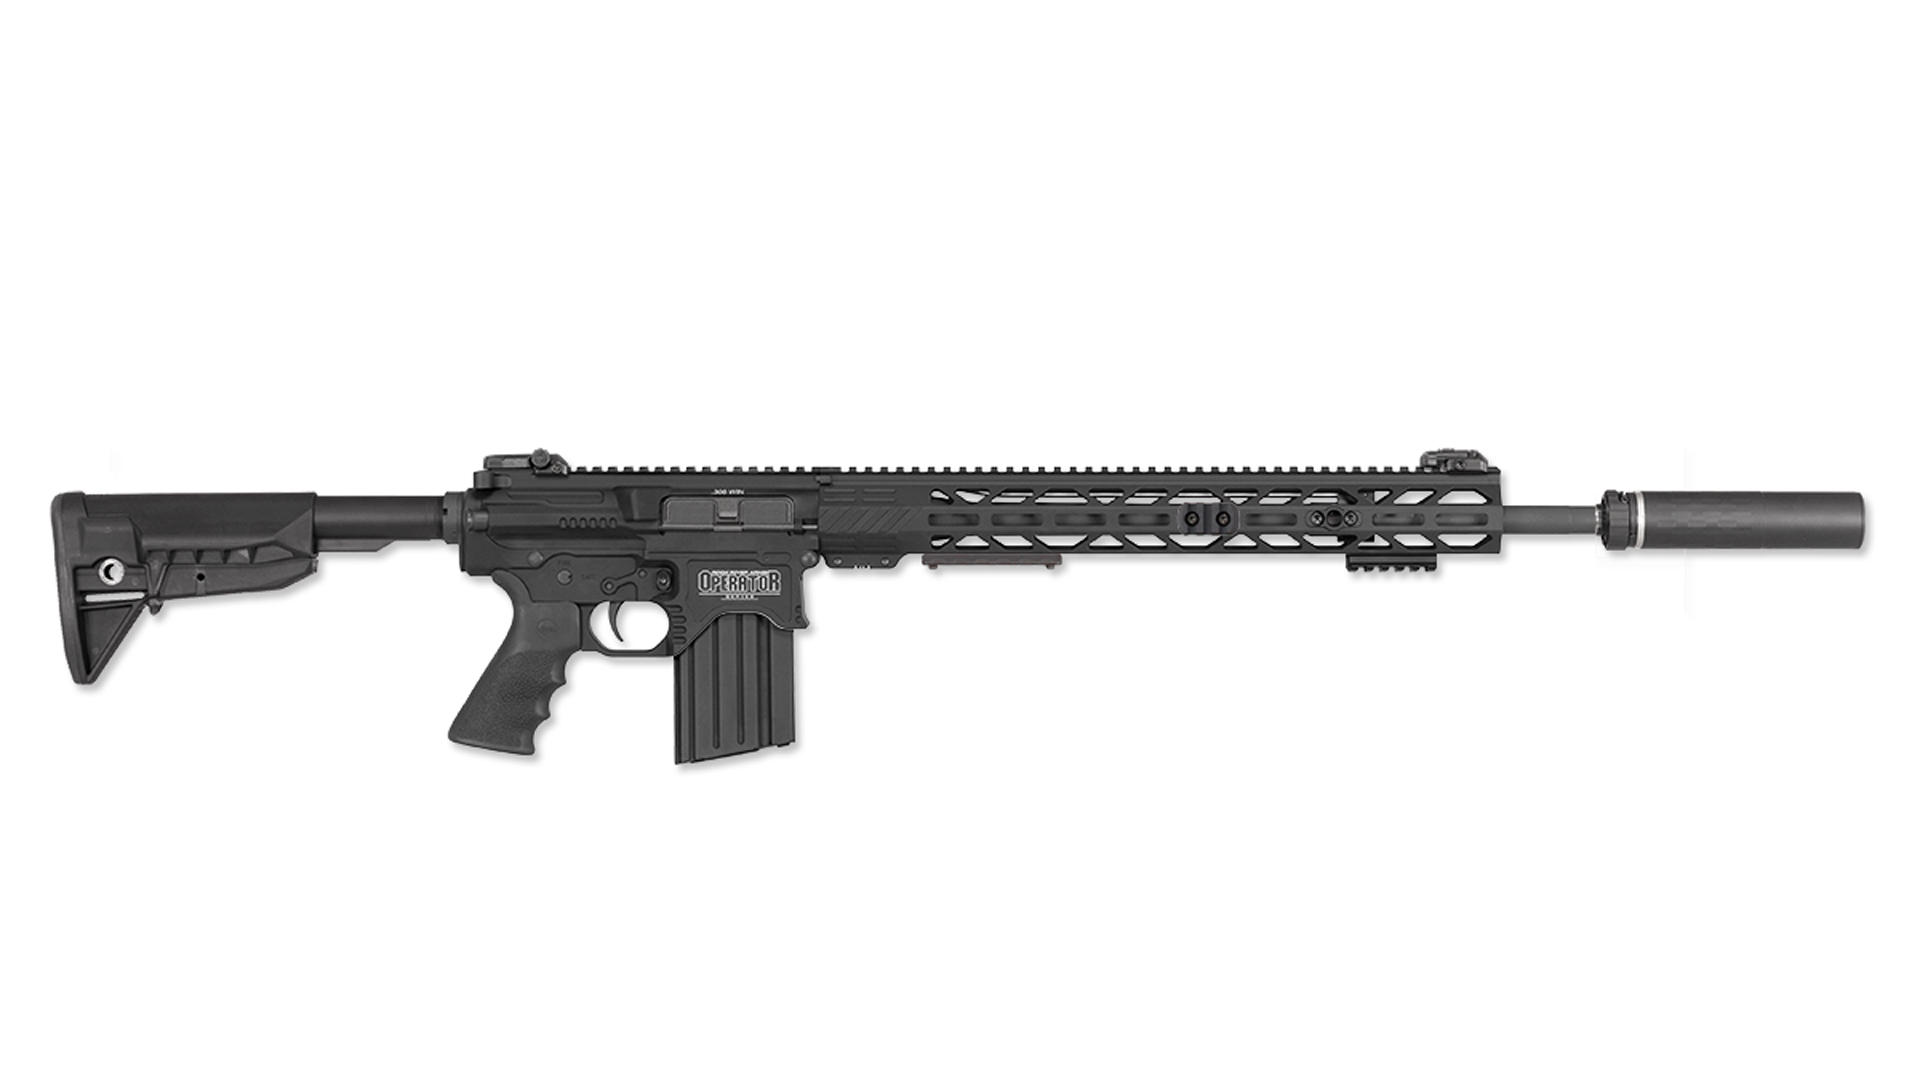 An enhanced version of the Rock River Arms DMR Operator shown with an included suppressor.